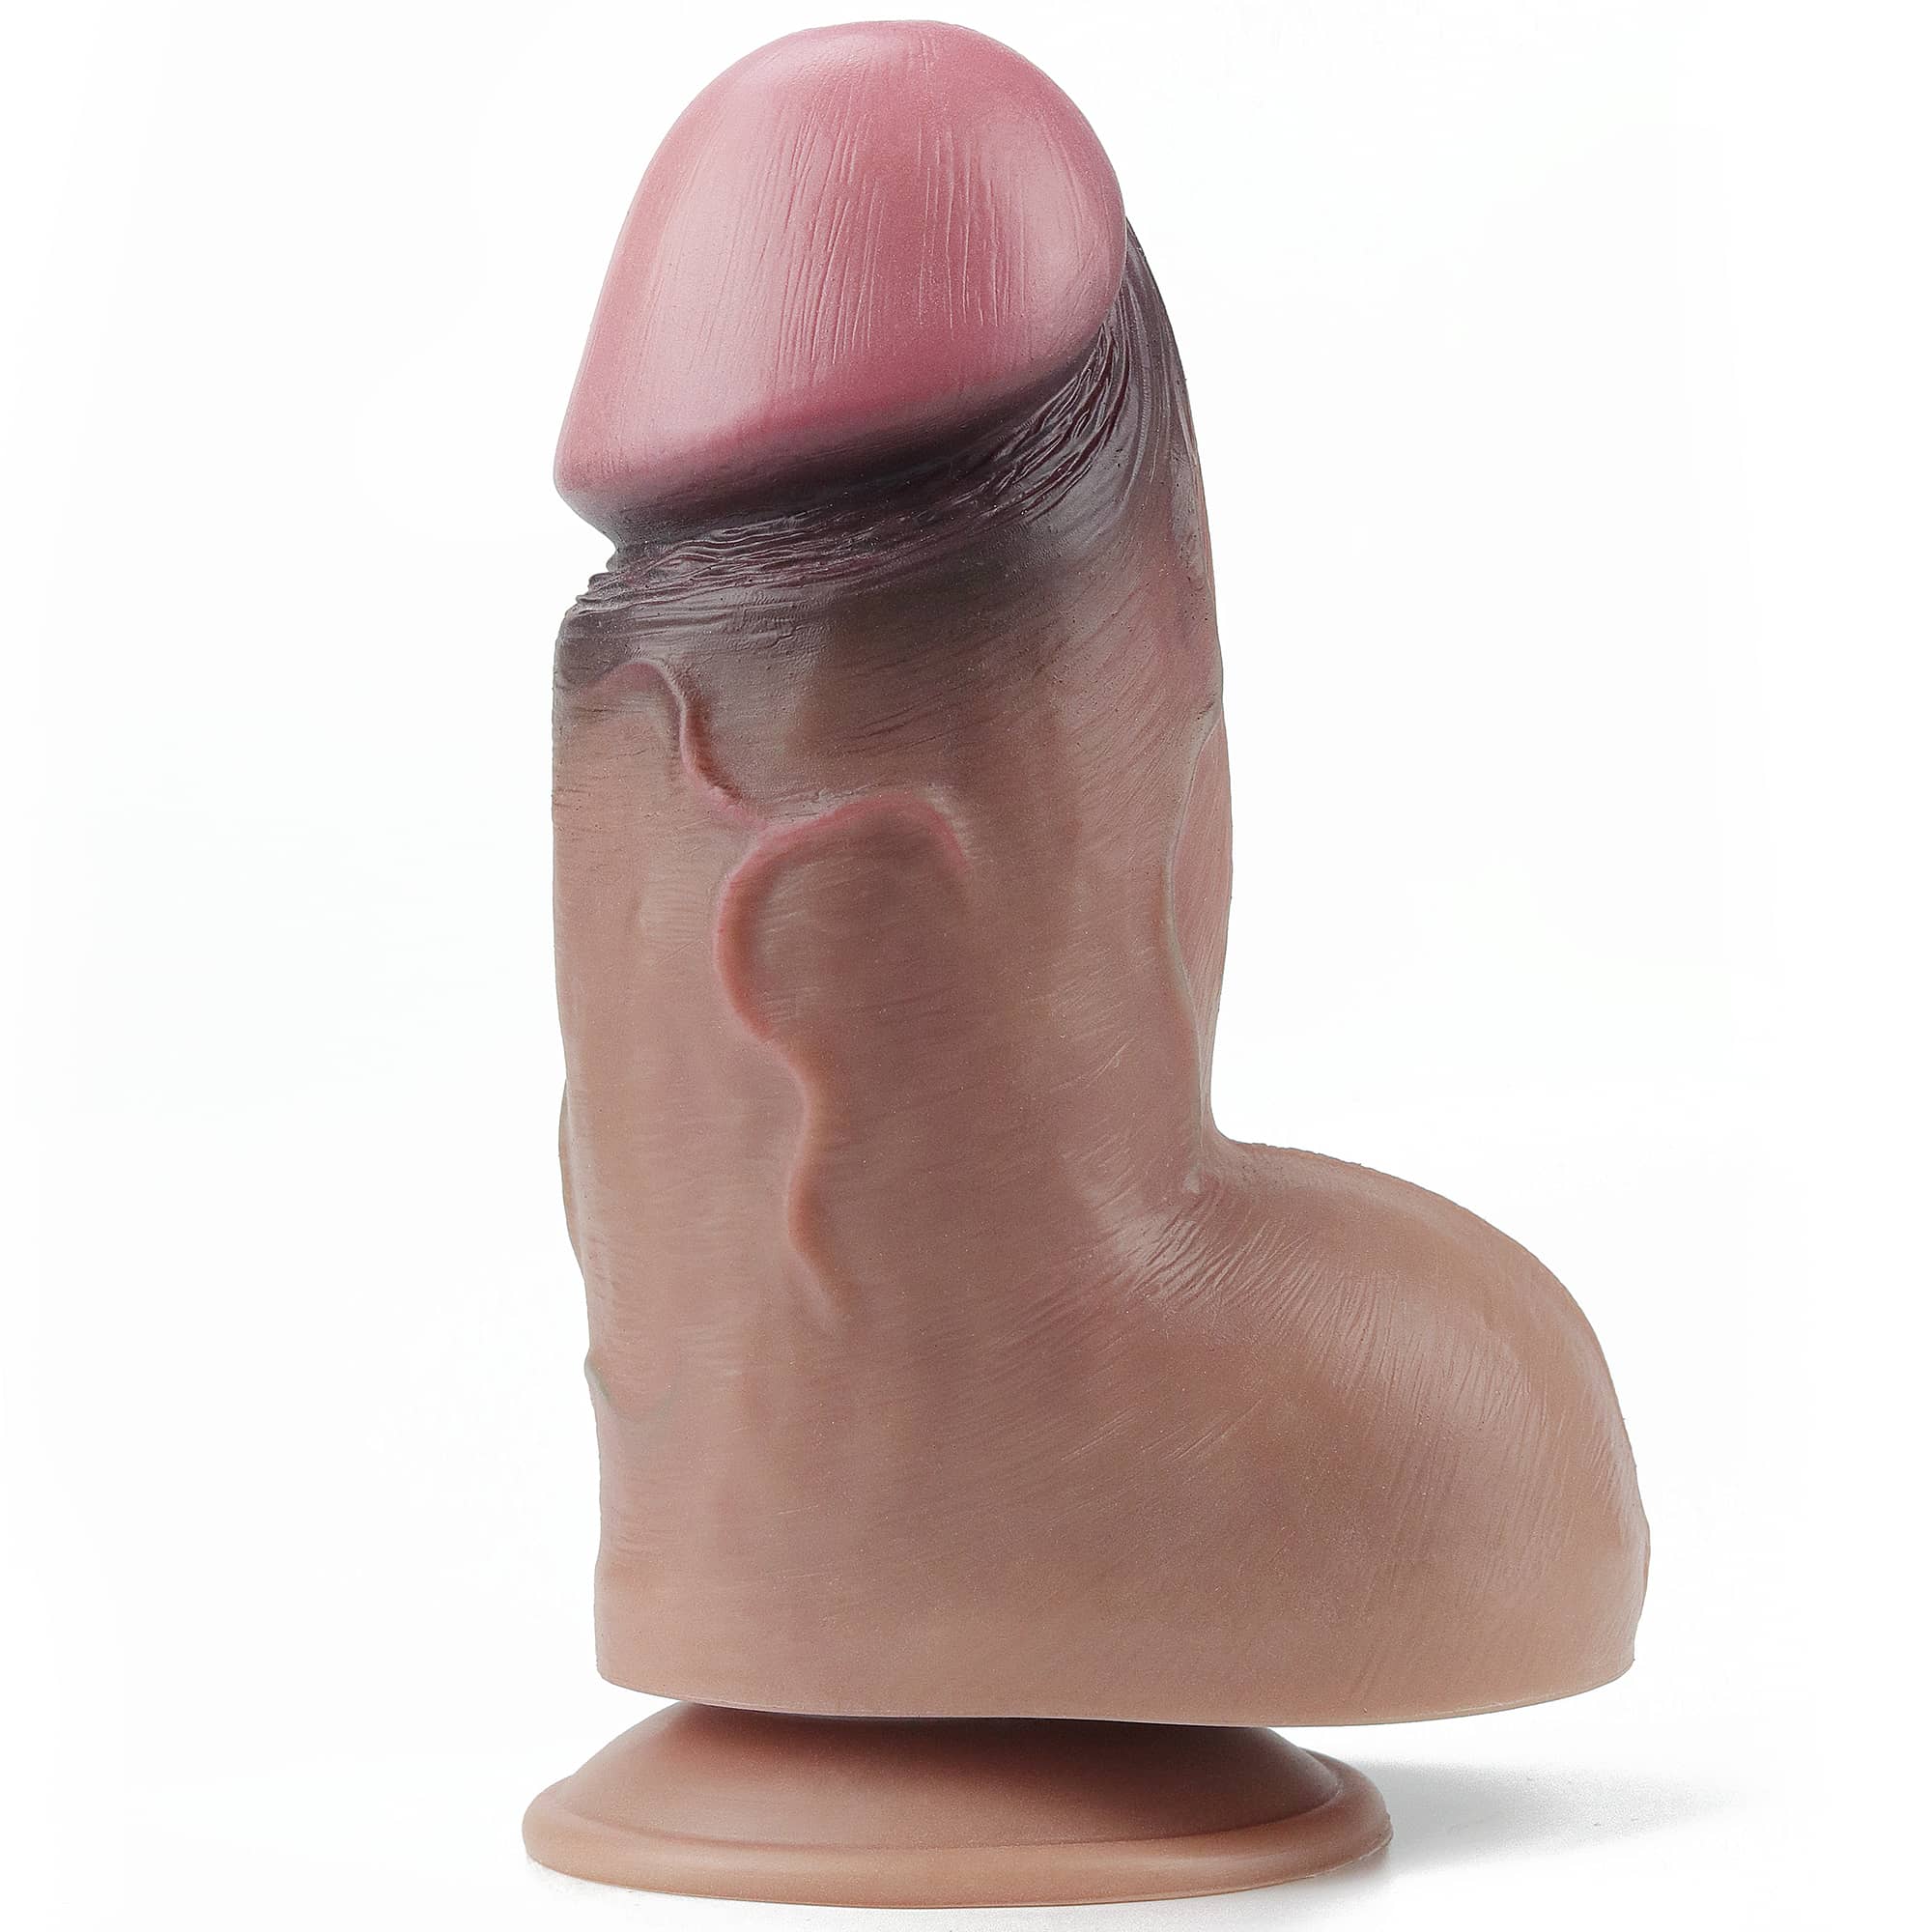 The 7 inches fat silicone butt plug dildo is upright